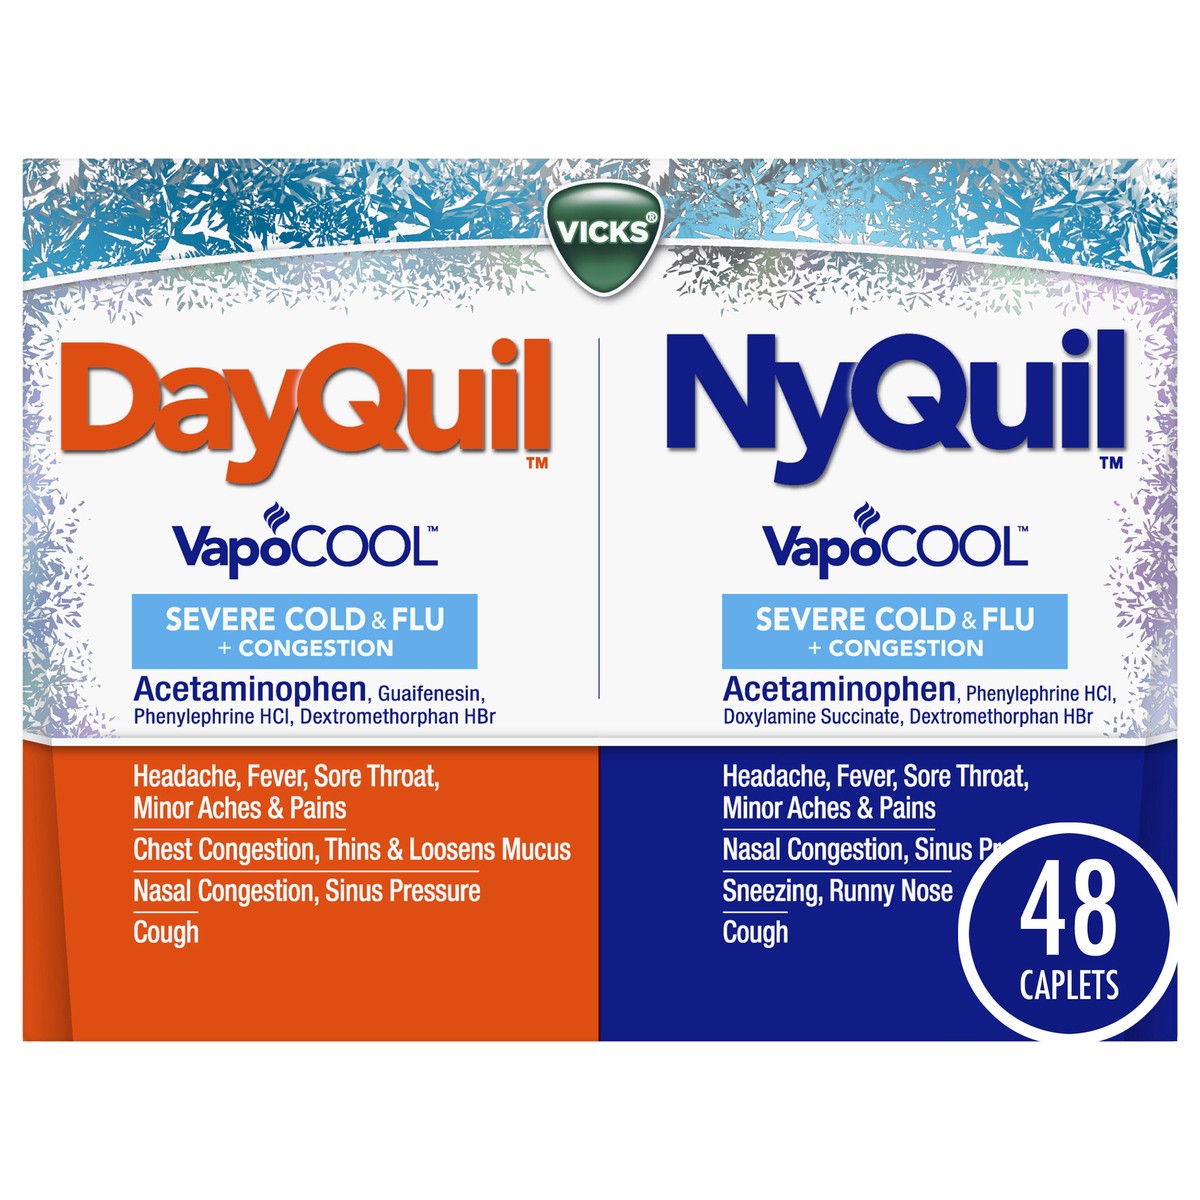 slide 1 of 2, Vicks DayQuil and NyQuil VapoCOOL SEVERE Combo Cold & Flu + Congestion Medicine, Max Strength Relief for Headache, Fever, Sore Throat, Minor Aches and Pains, Nasal Congestion, Sinus Pressure, Stuffy Nose, and Cough, 24 Count - 16 DayQuil, 8 NyQuil, 24 ct